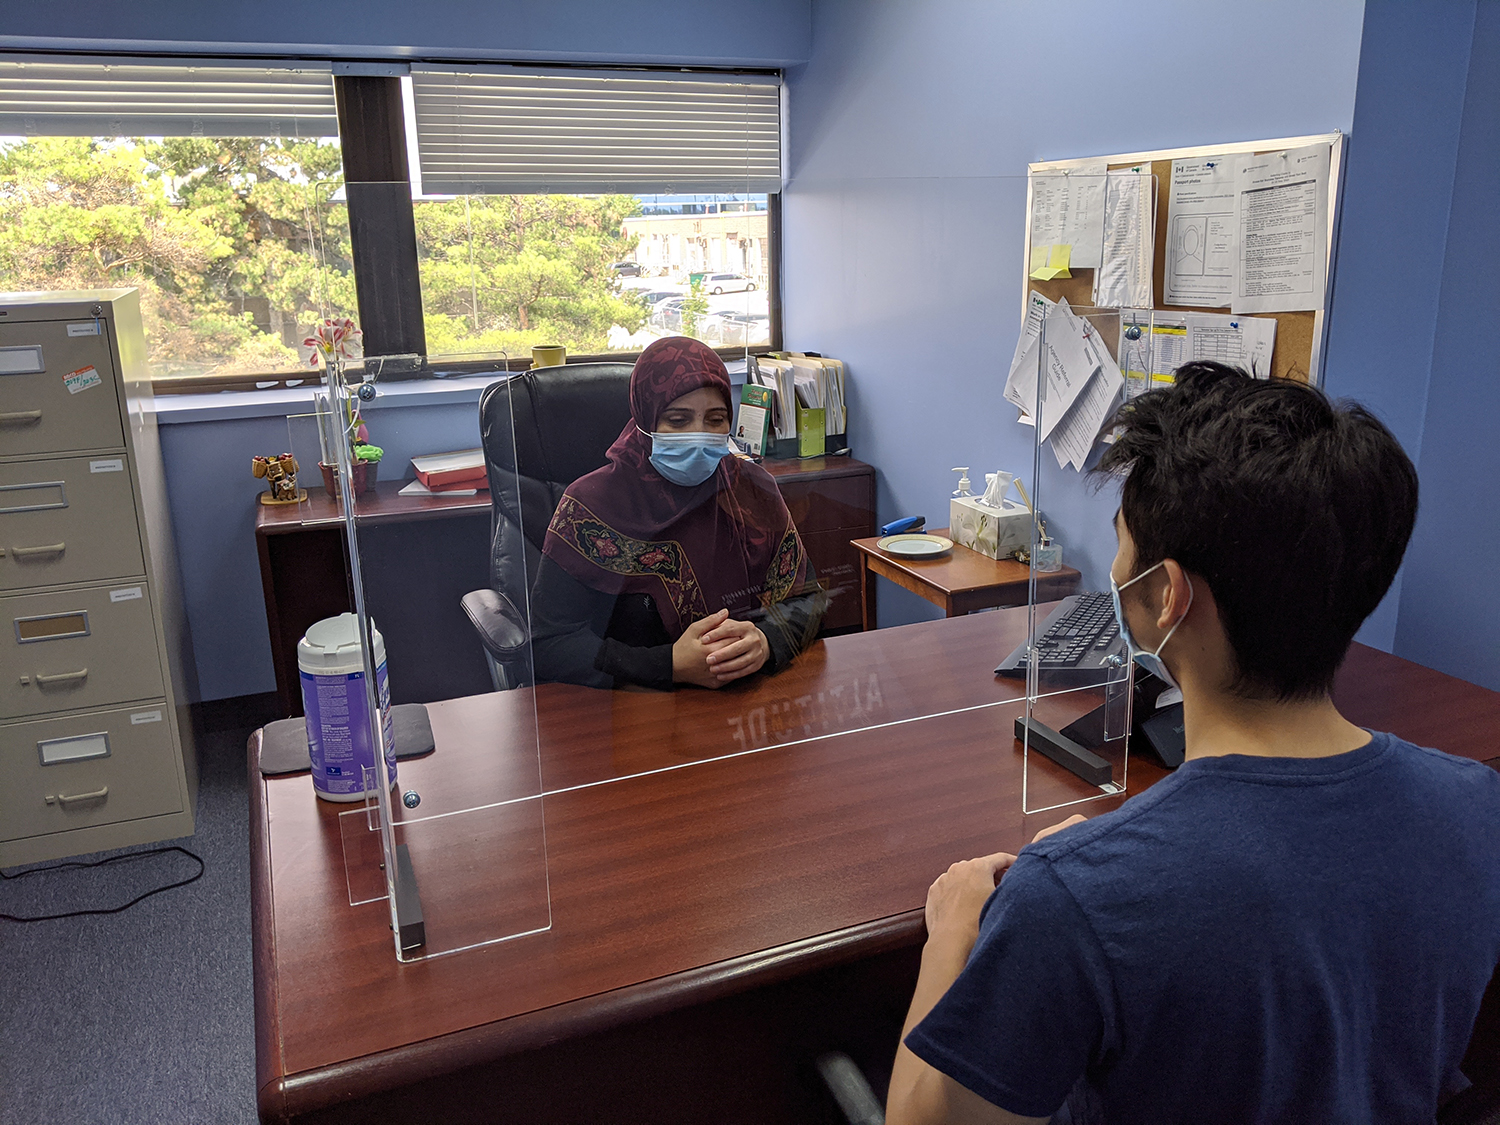 A settlement worker seeing a client in her office, they're both wearing masks over their mouths with glass partition between them.